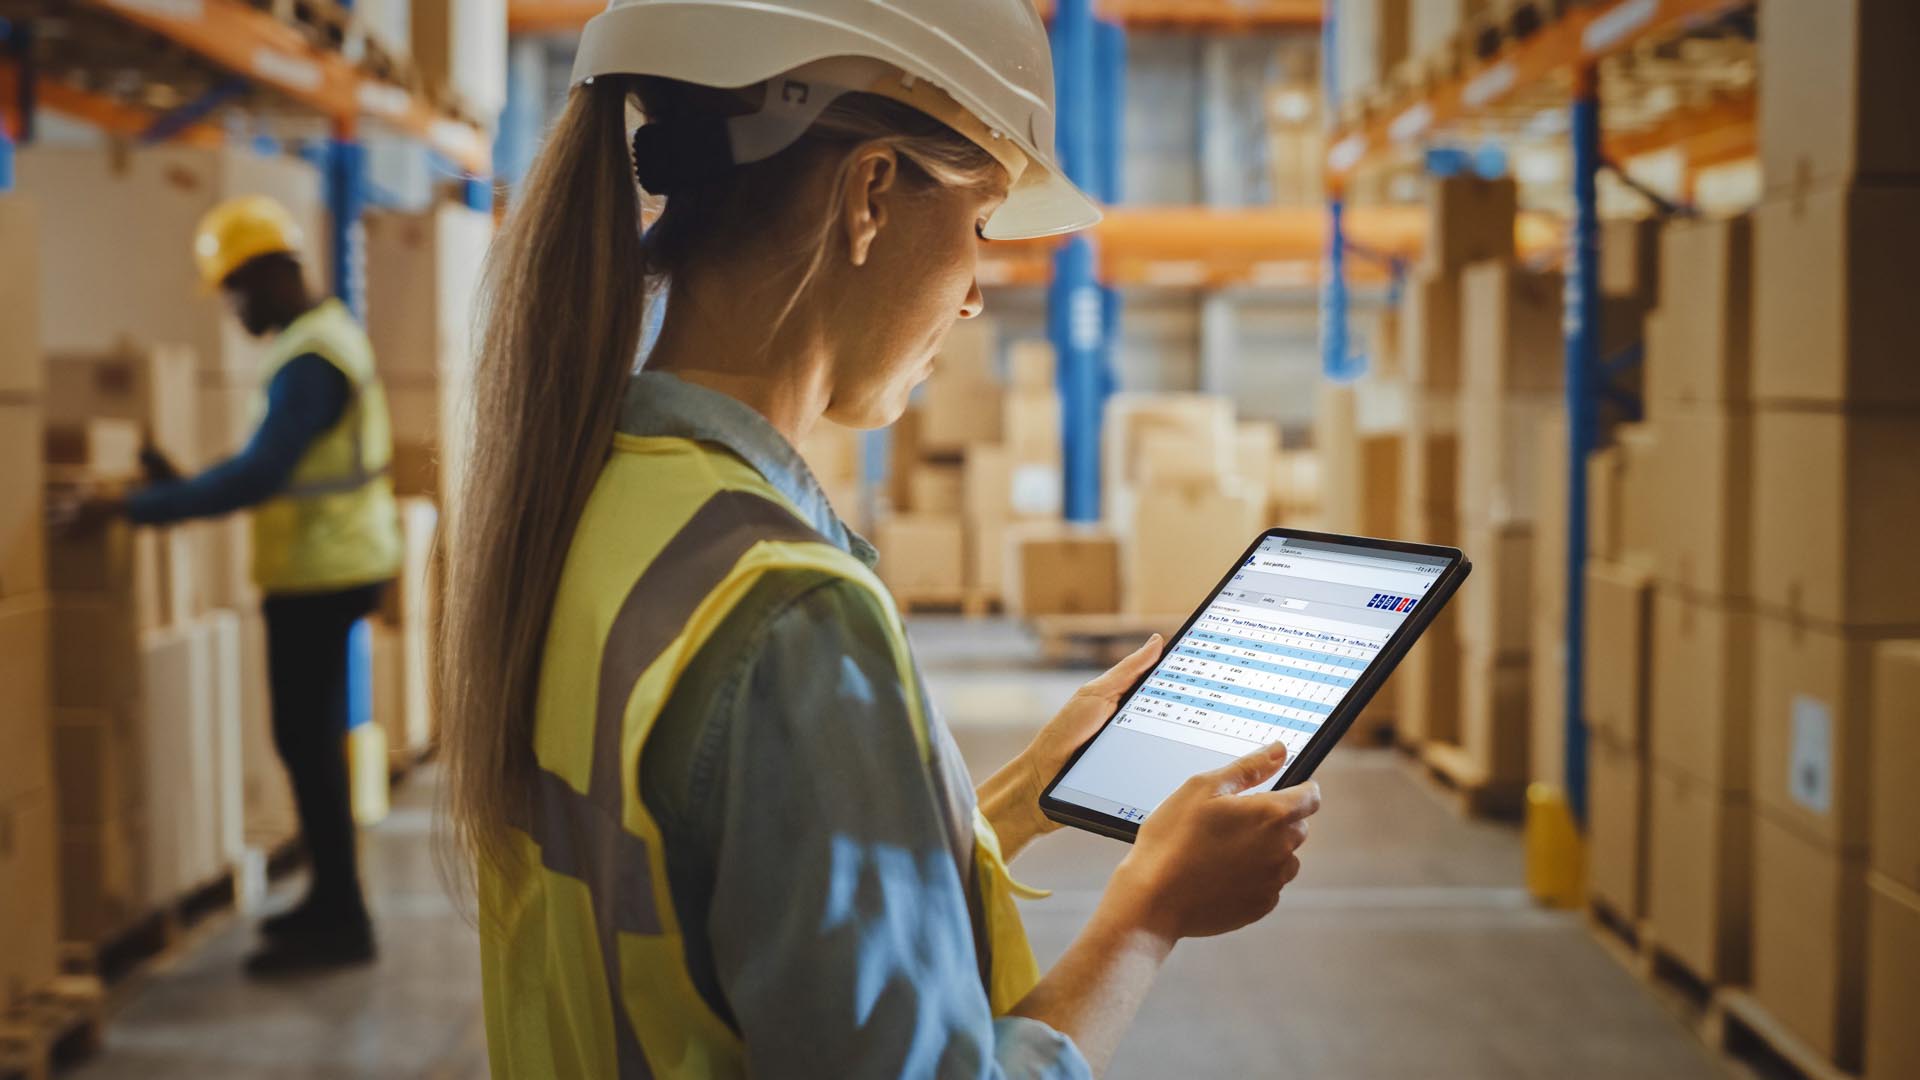 Shop Manager apps allow a job shop to ship orders, receive inventory, and move stock and remnants.